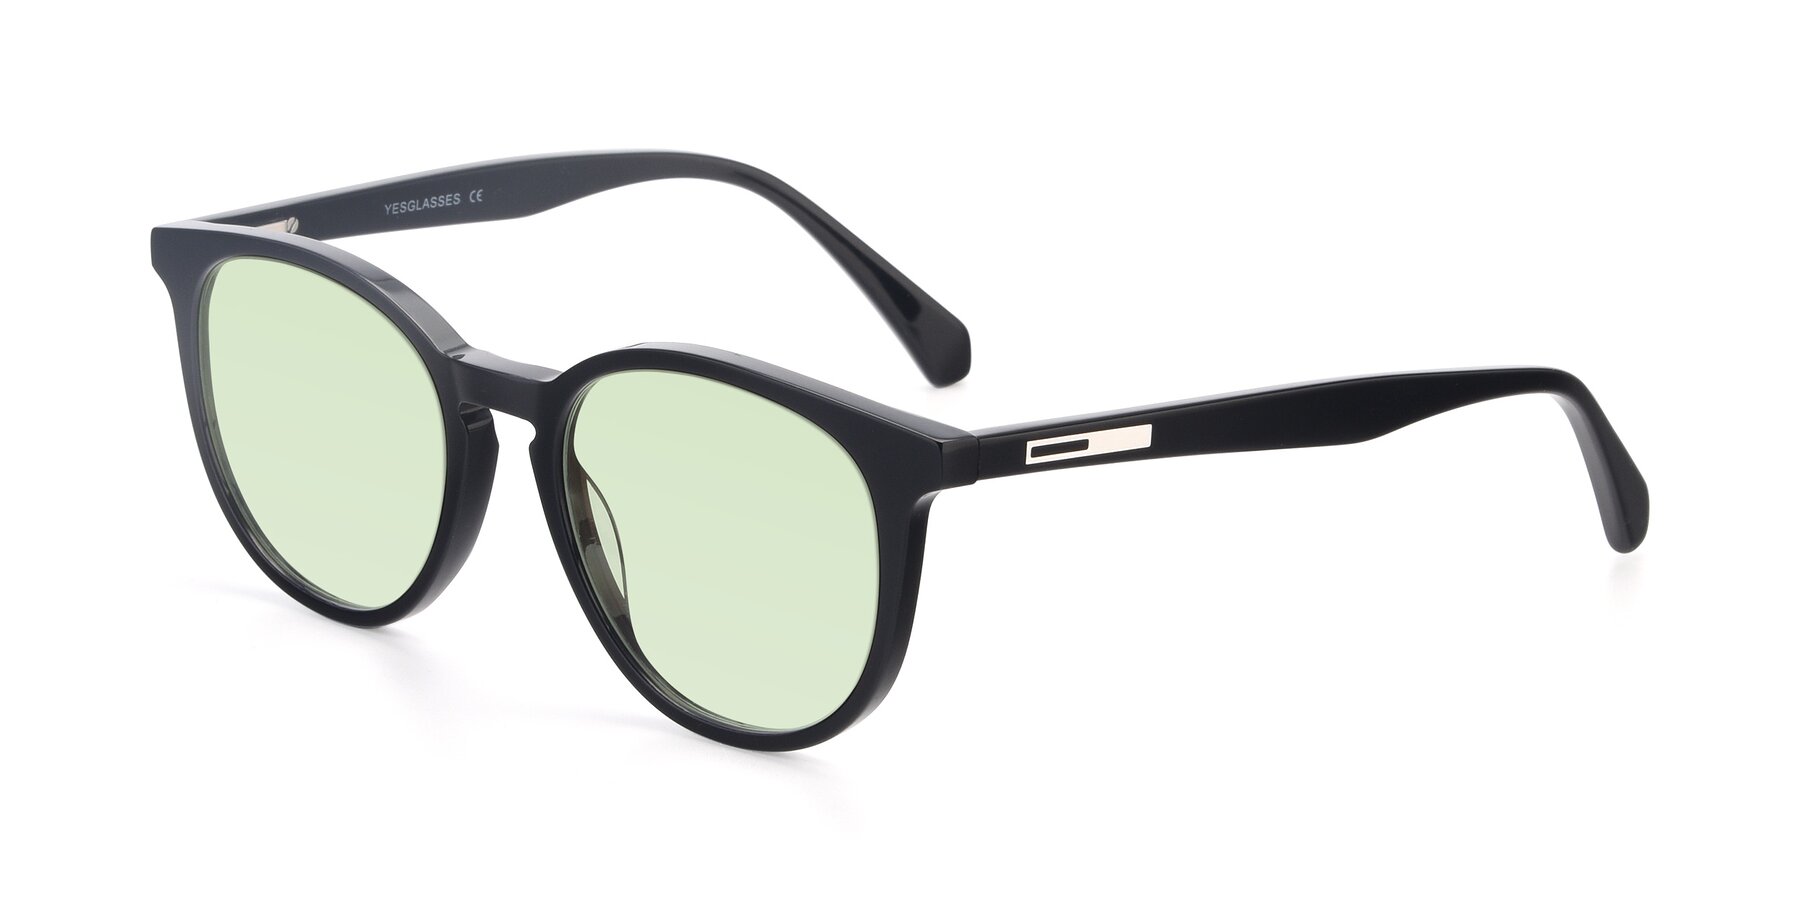 Angle of 17721 in Black with Light Green Tinted Lenses